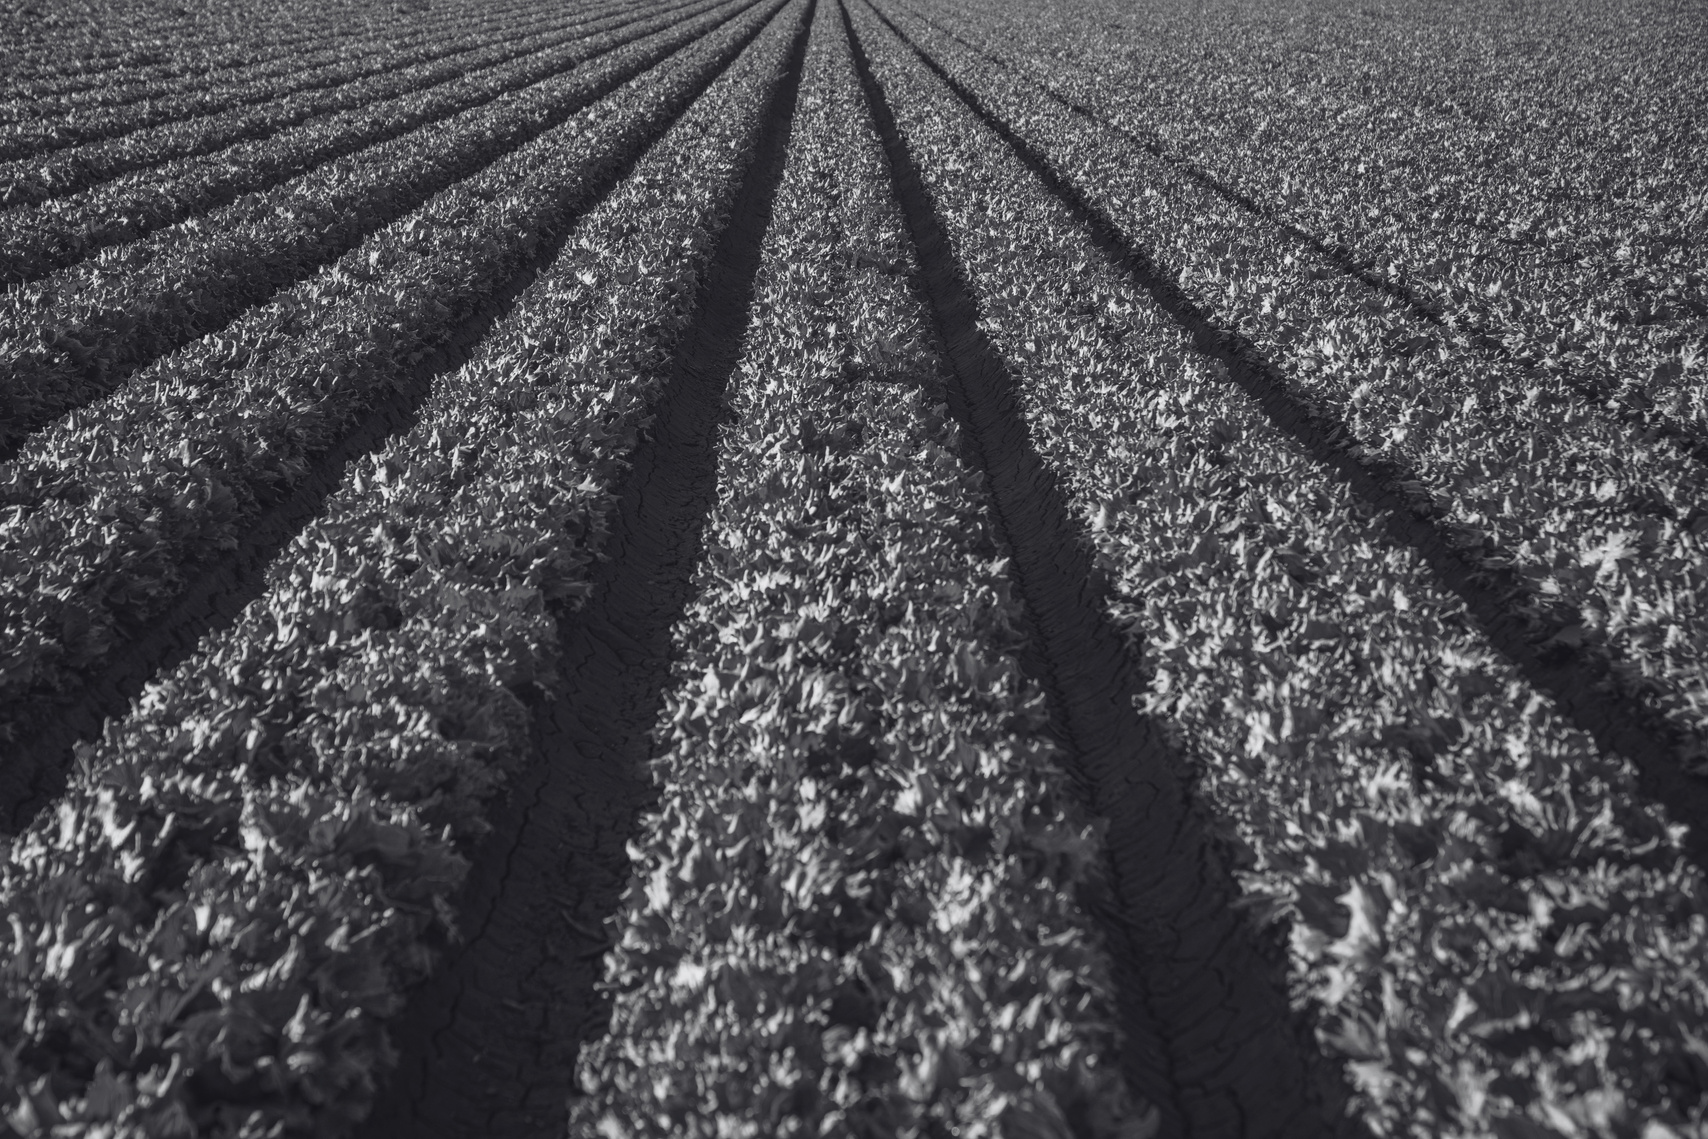 black and white photograph of rows of crops in a field